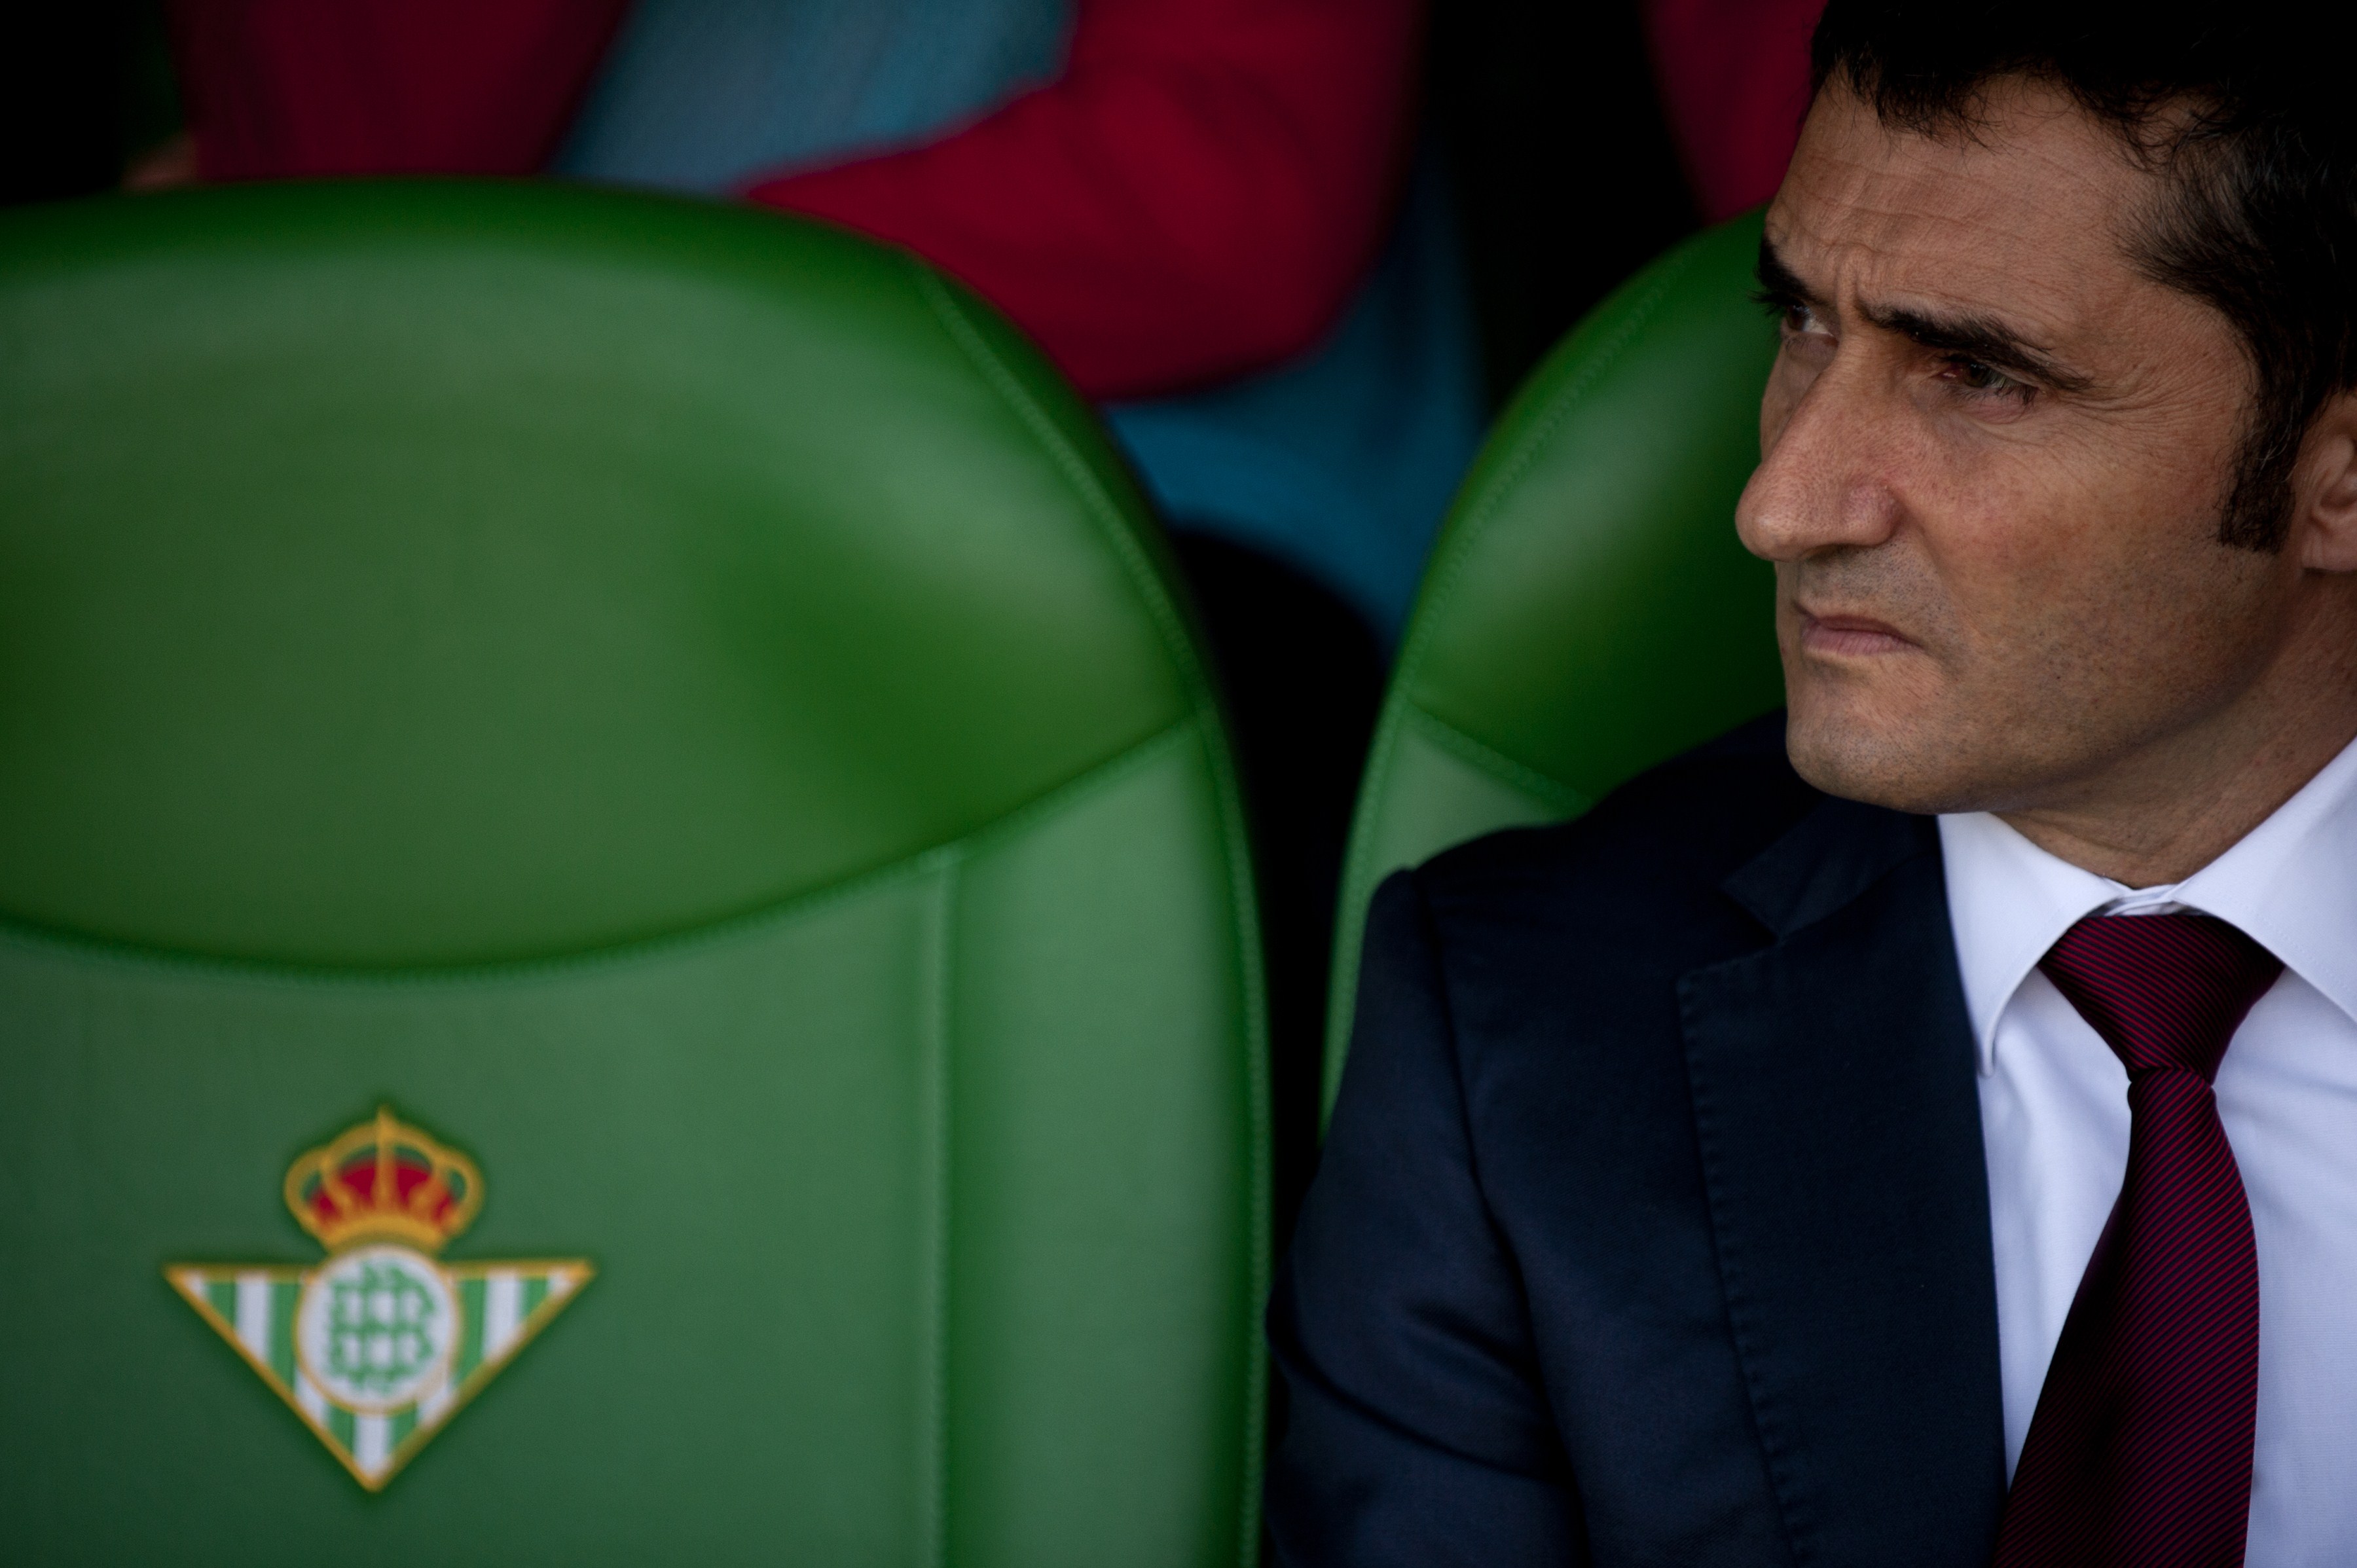 Athletic Bilbao's coach Ernesto Valverde looks on before the Spanish league football match Real Betis Balompie vs Athletic Club Bilbao at the Benito Villamarin stadium in Sevilla on February 23, 2014.  AFP PHOTO / JORGE GUERRERO        (Photo credit should read Jorge Guerrero/AFP/Getty Images)